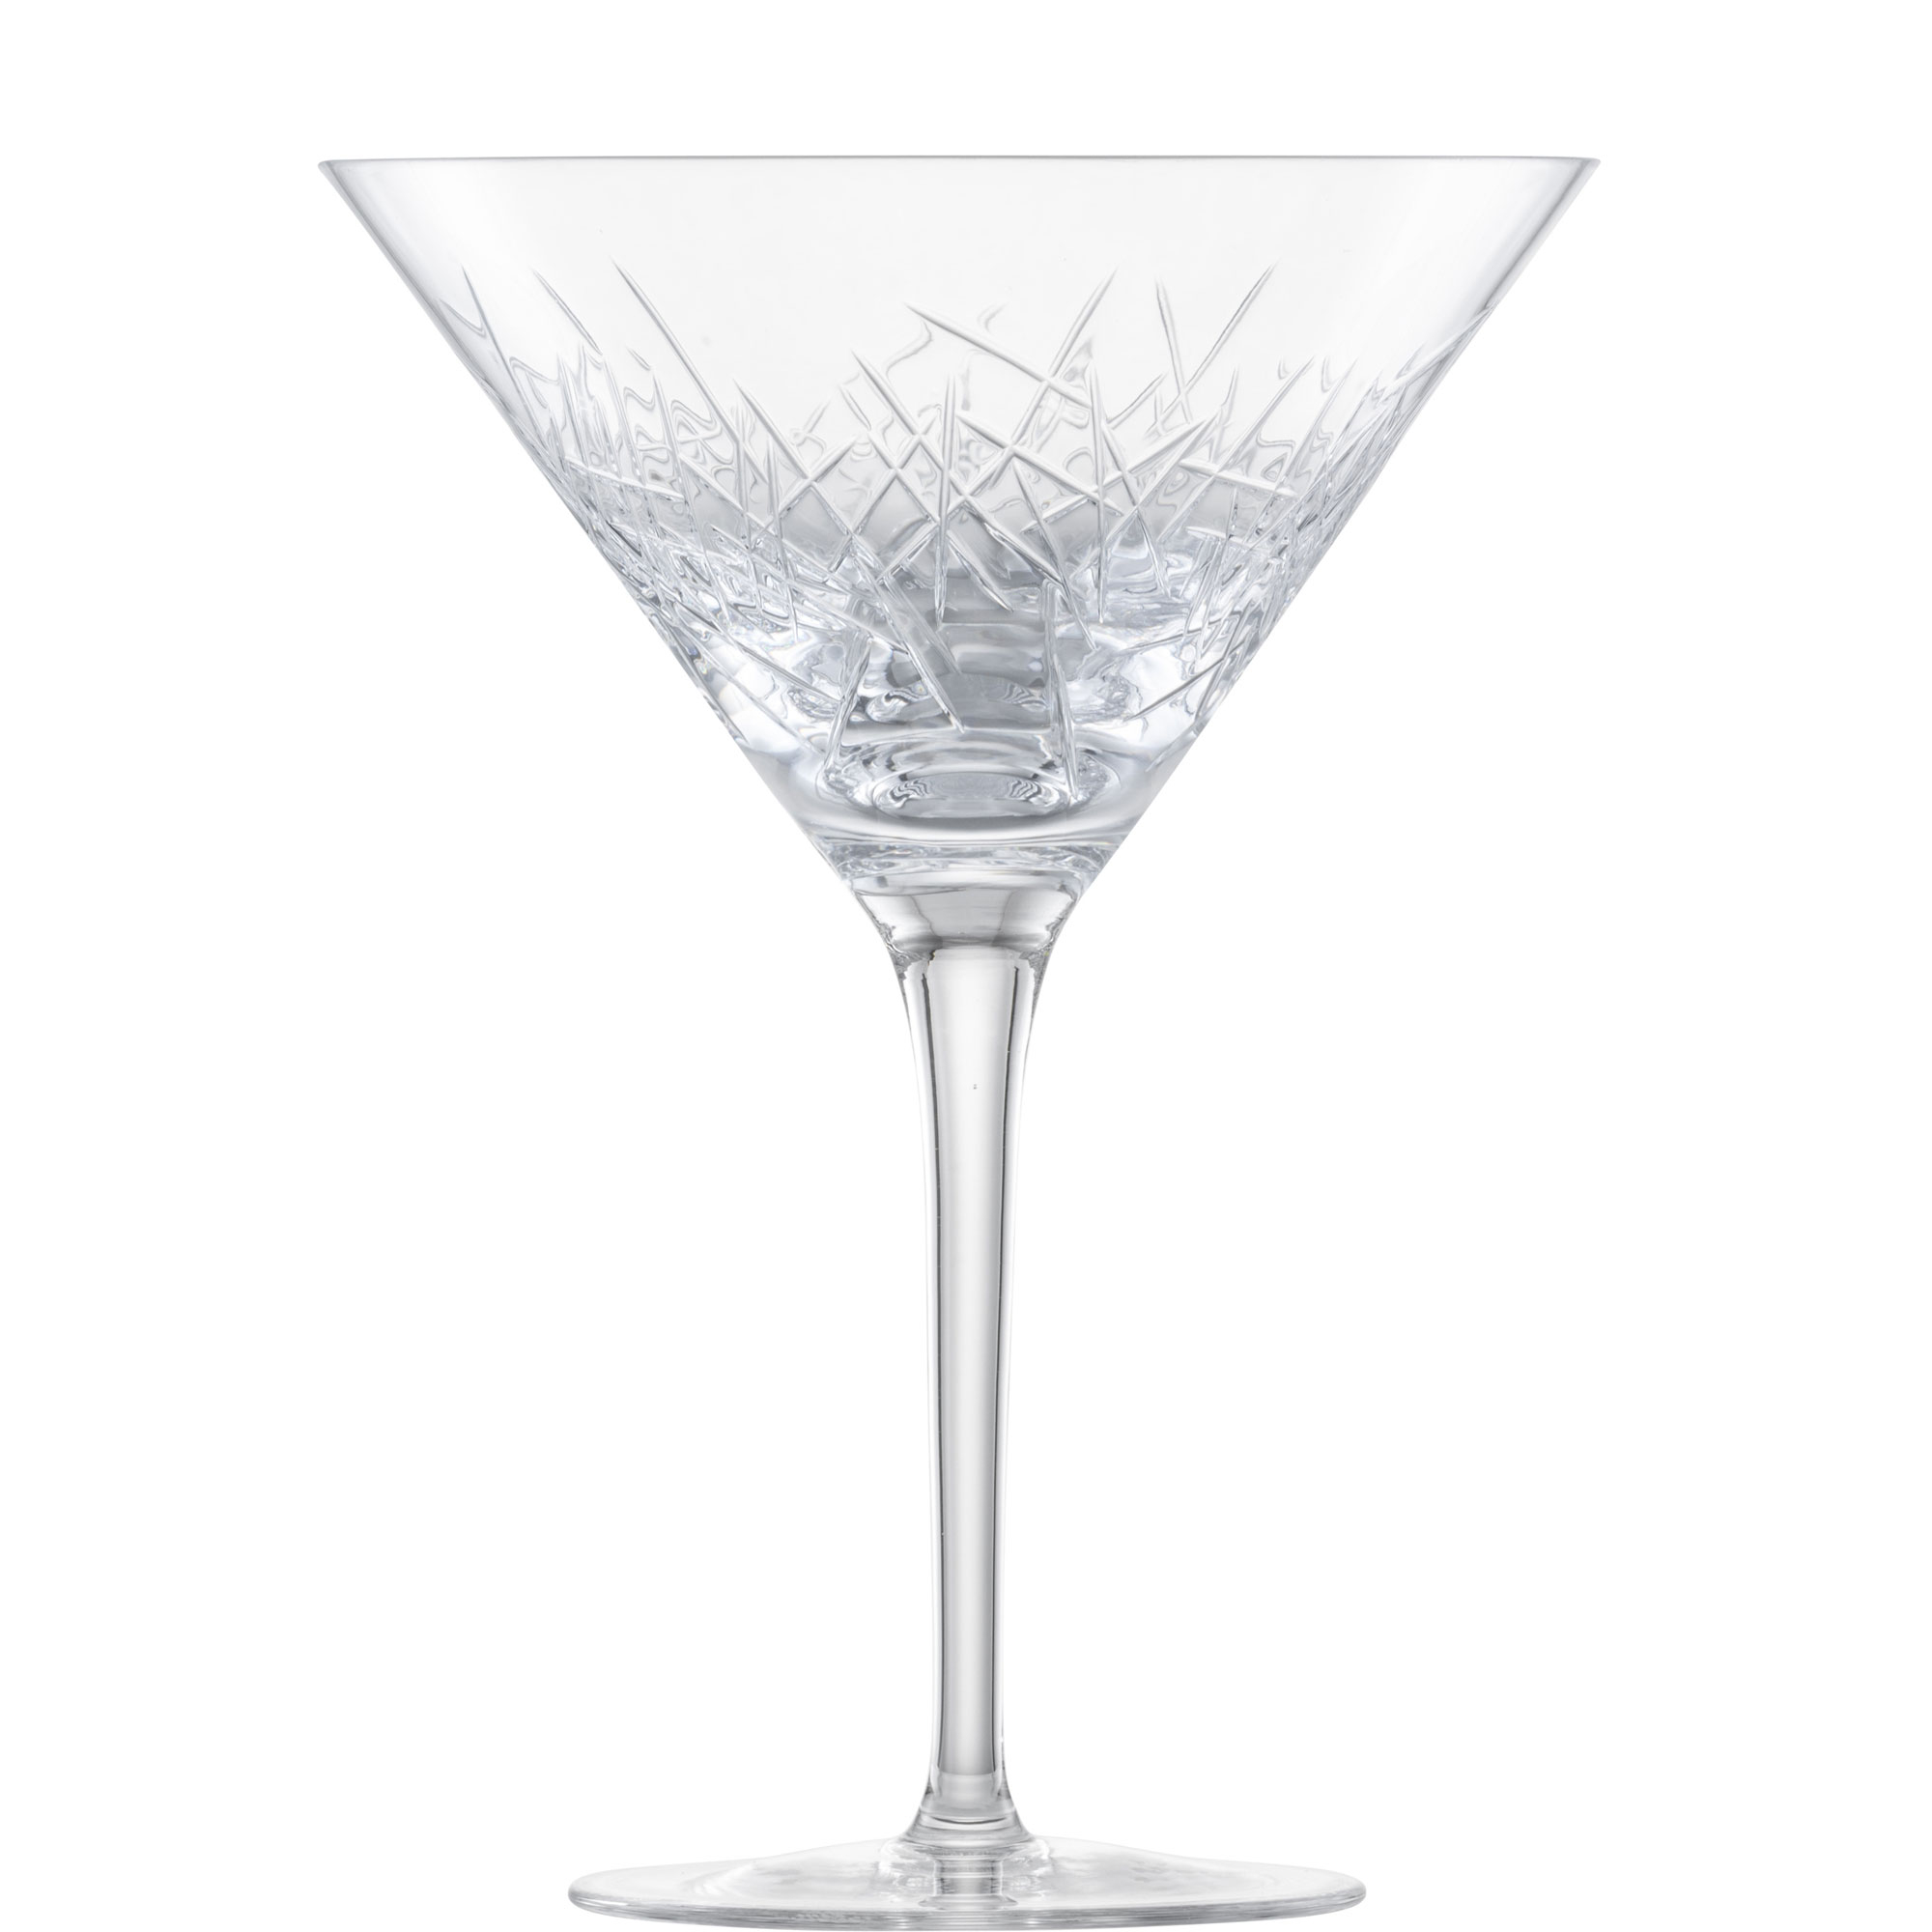 Martini glass Hommage Glace, Zwiesel Glas - 294ml